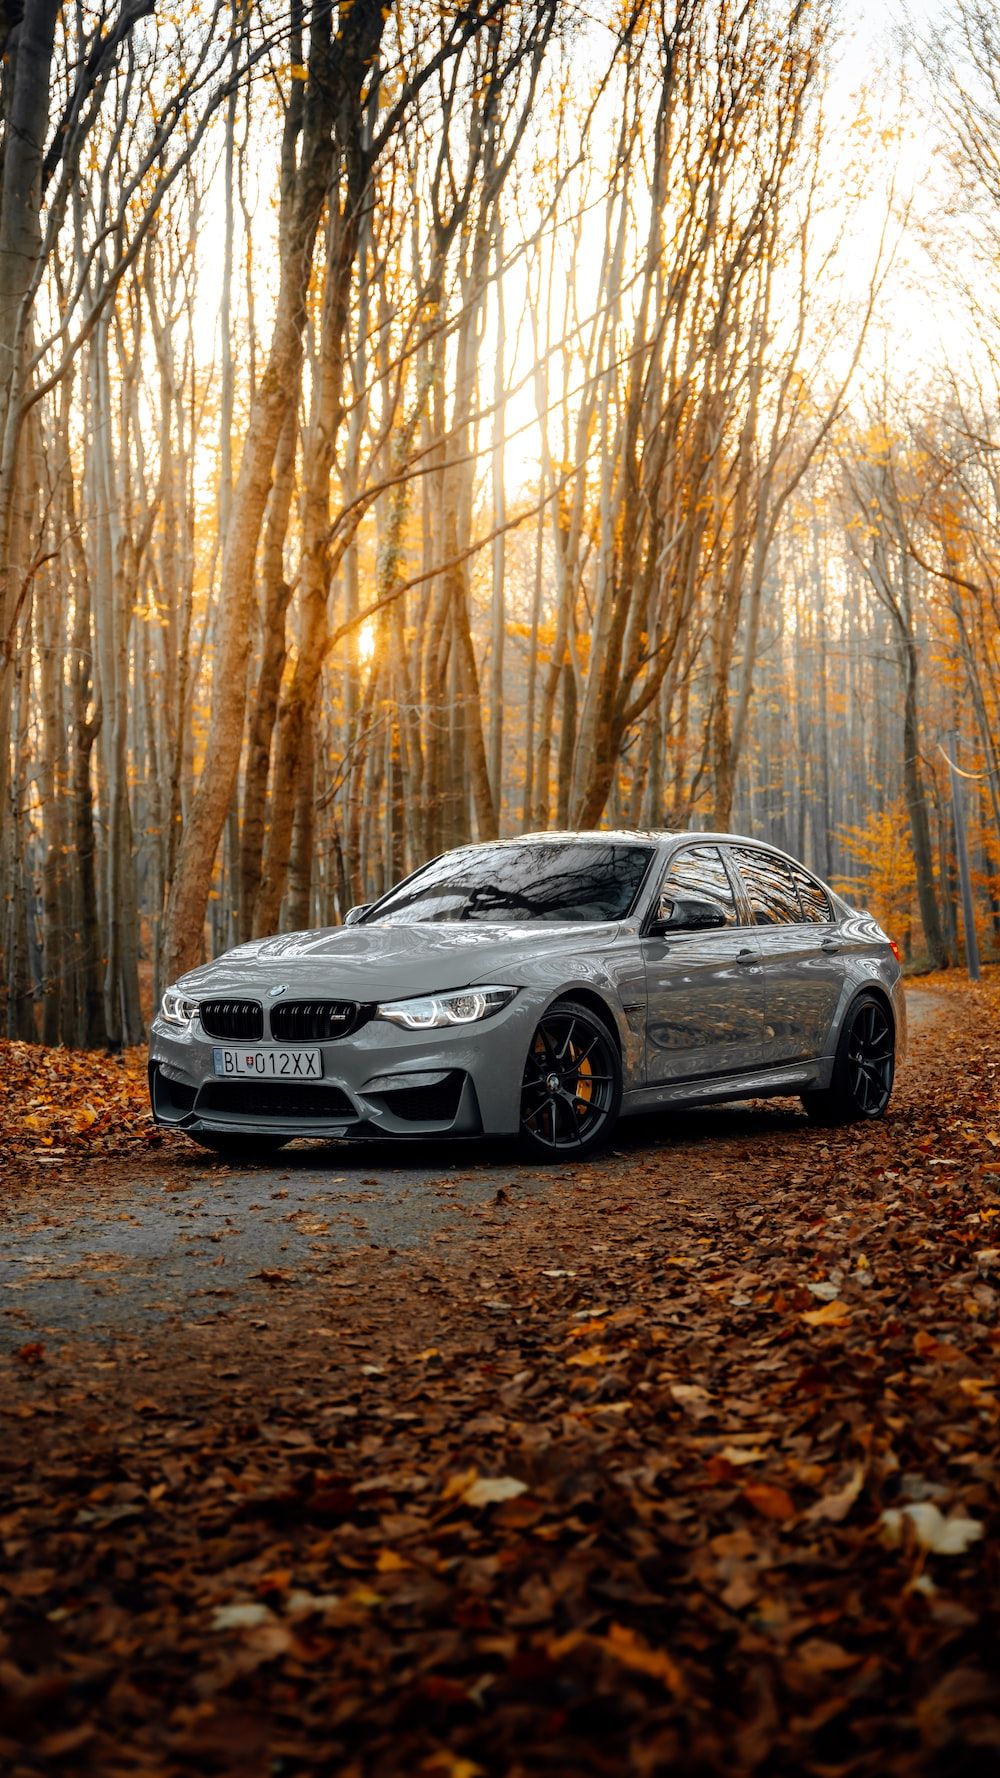 A silver BMW M3 parked in a forest surrounded by trees - BMW, cars